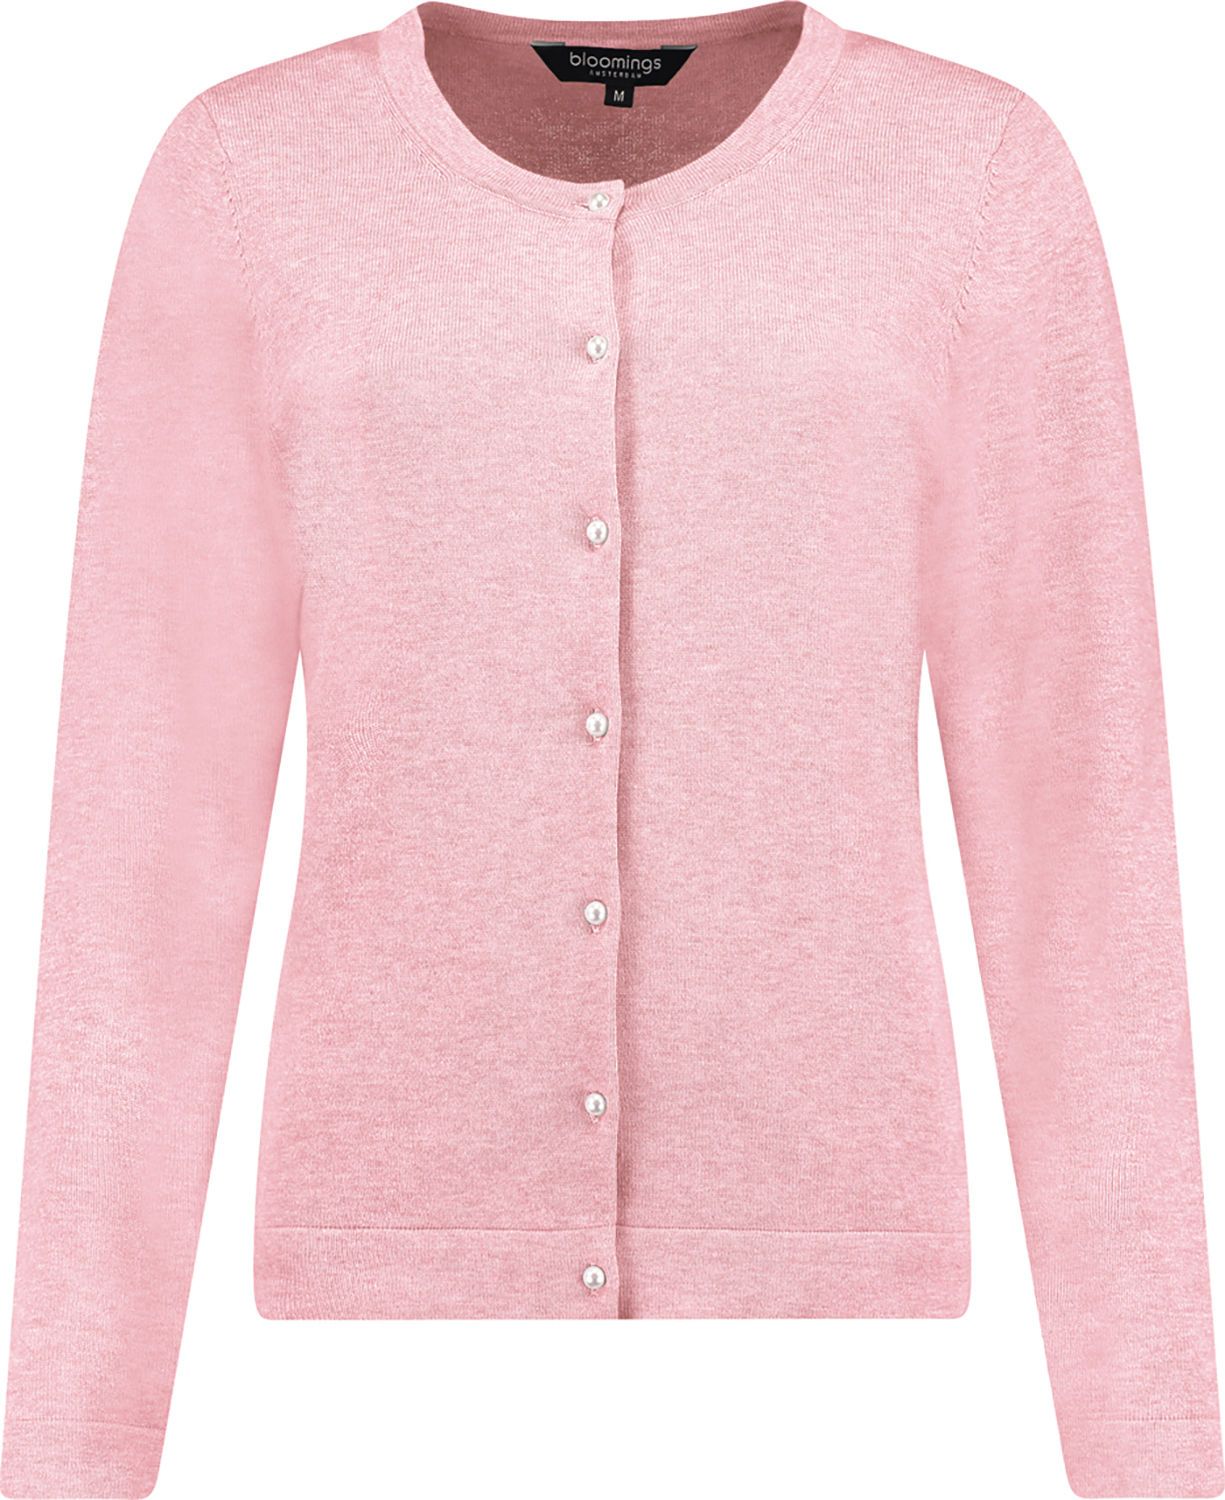 crew neck carsigan pearl button Roze